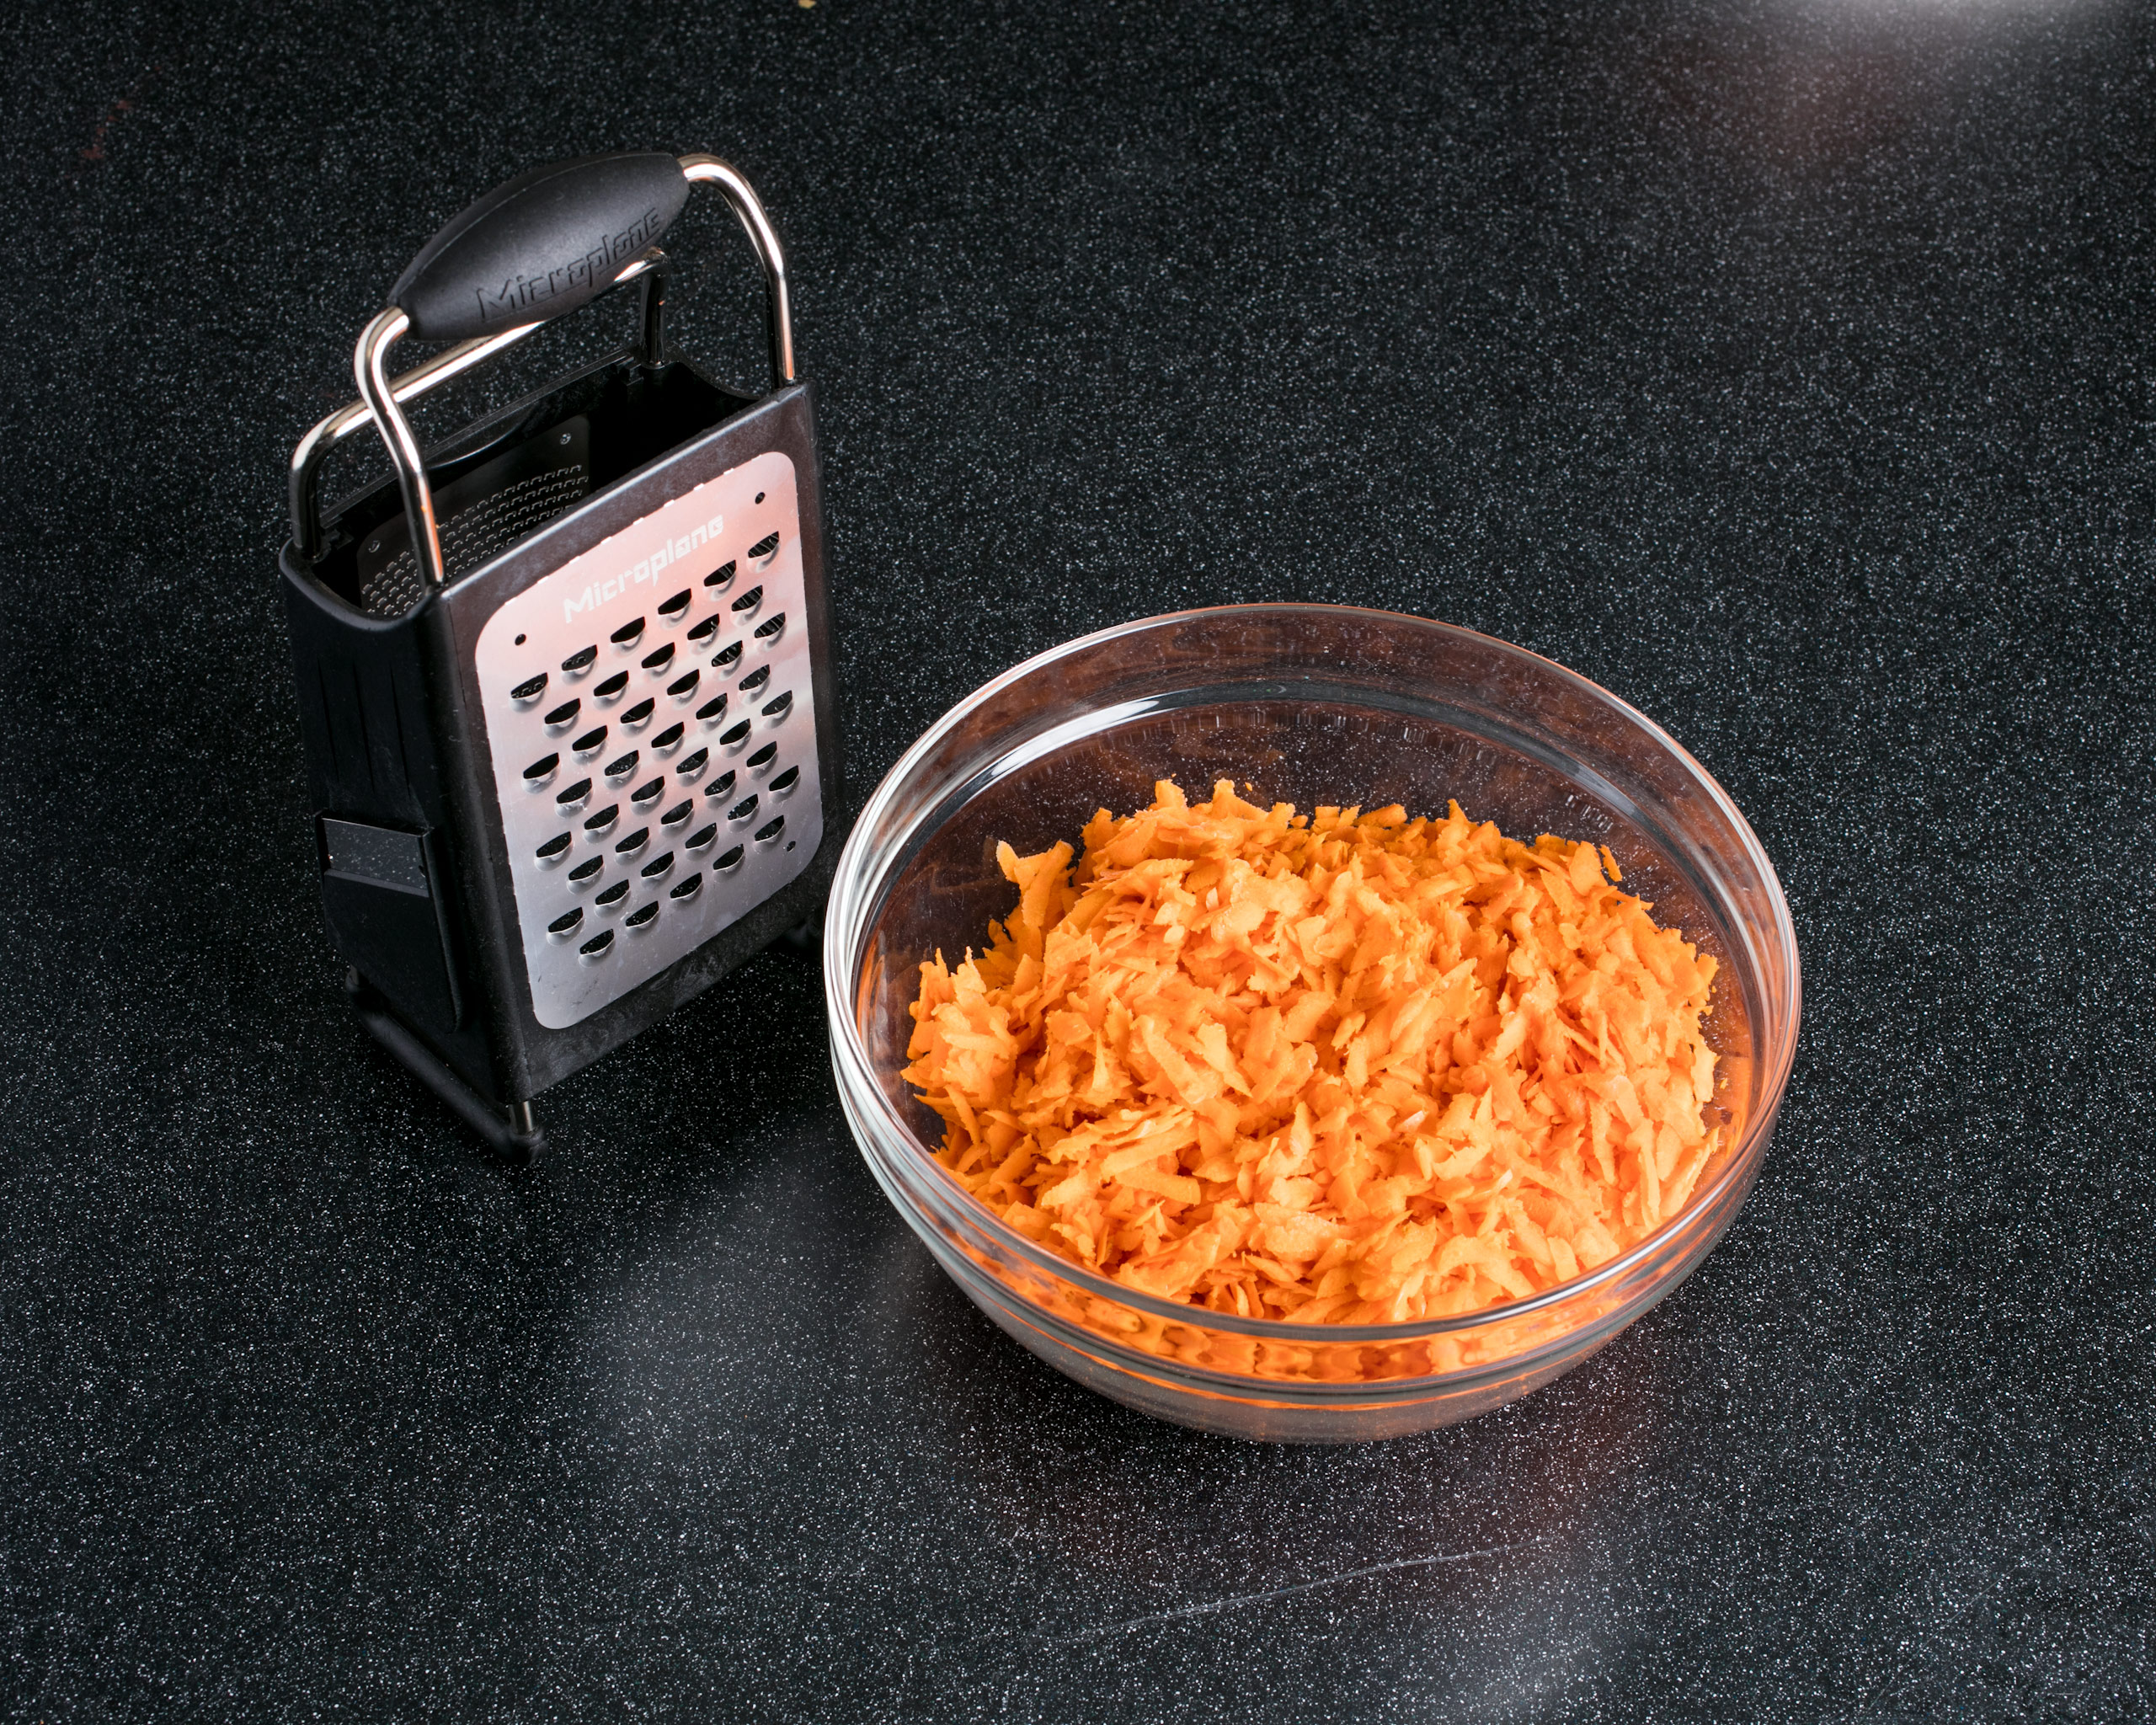 Minnesota Cooking: Using a Salad Shooter to Grate Carrots - Delishably